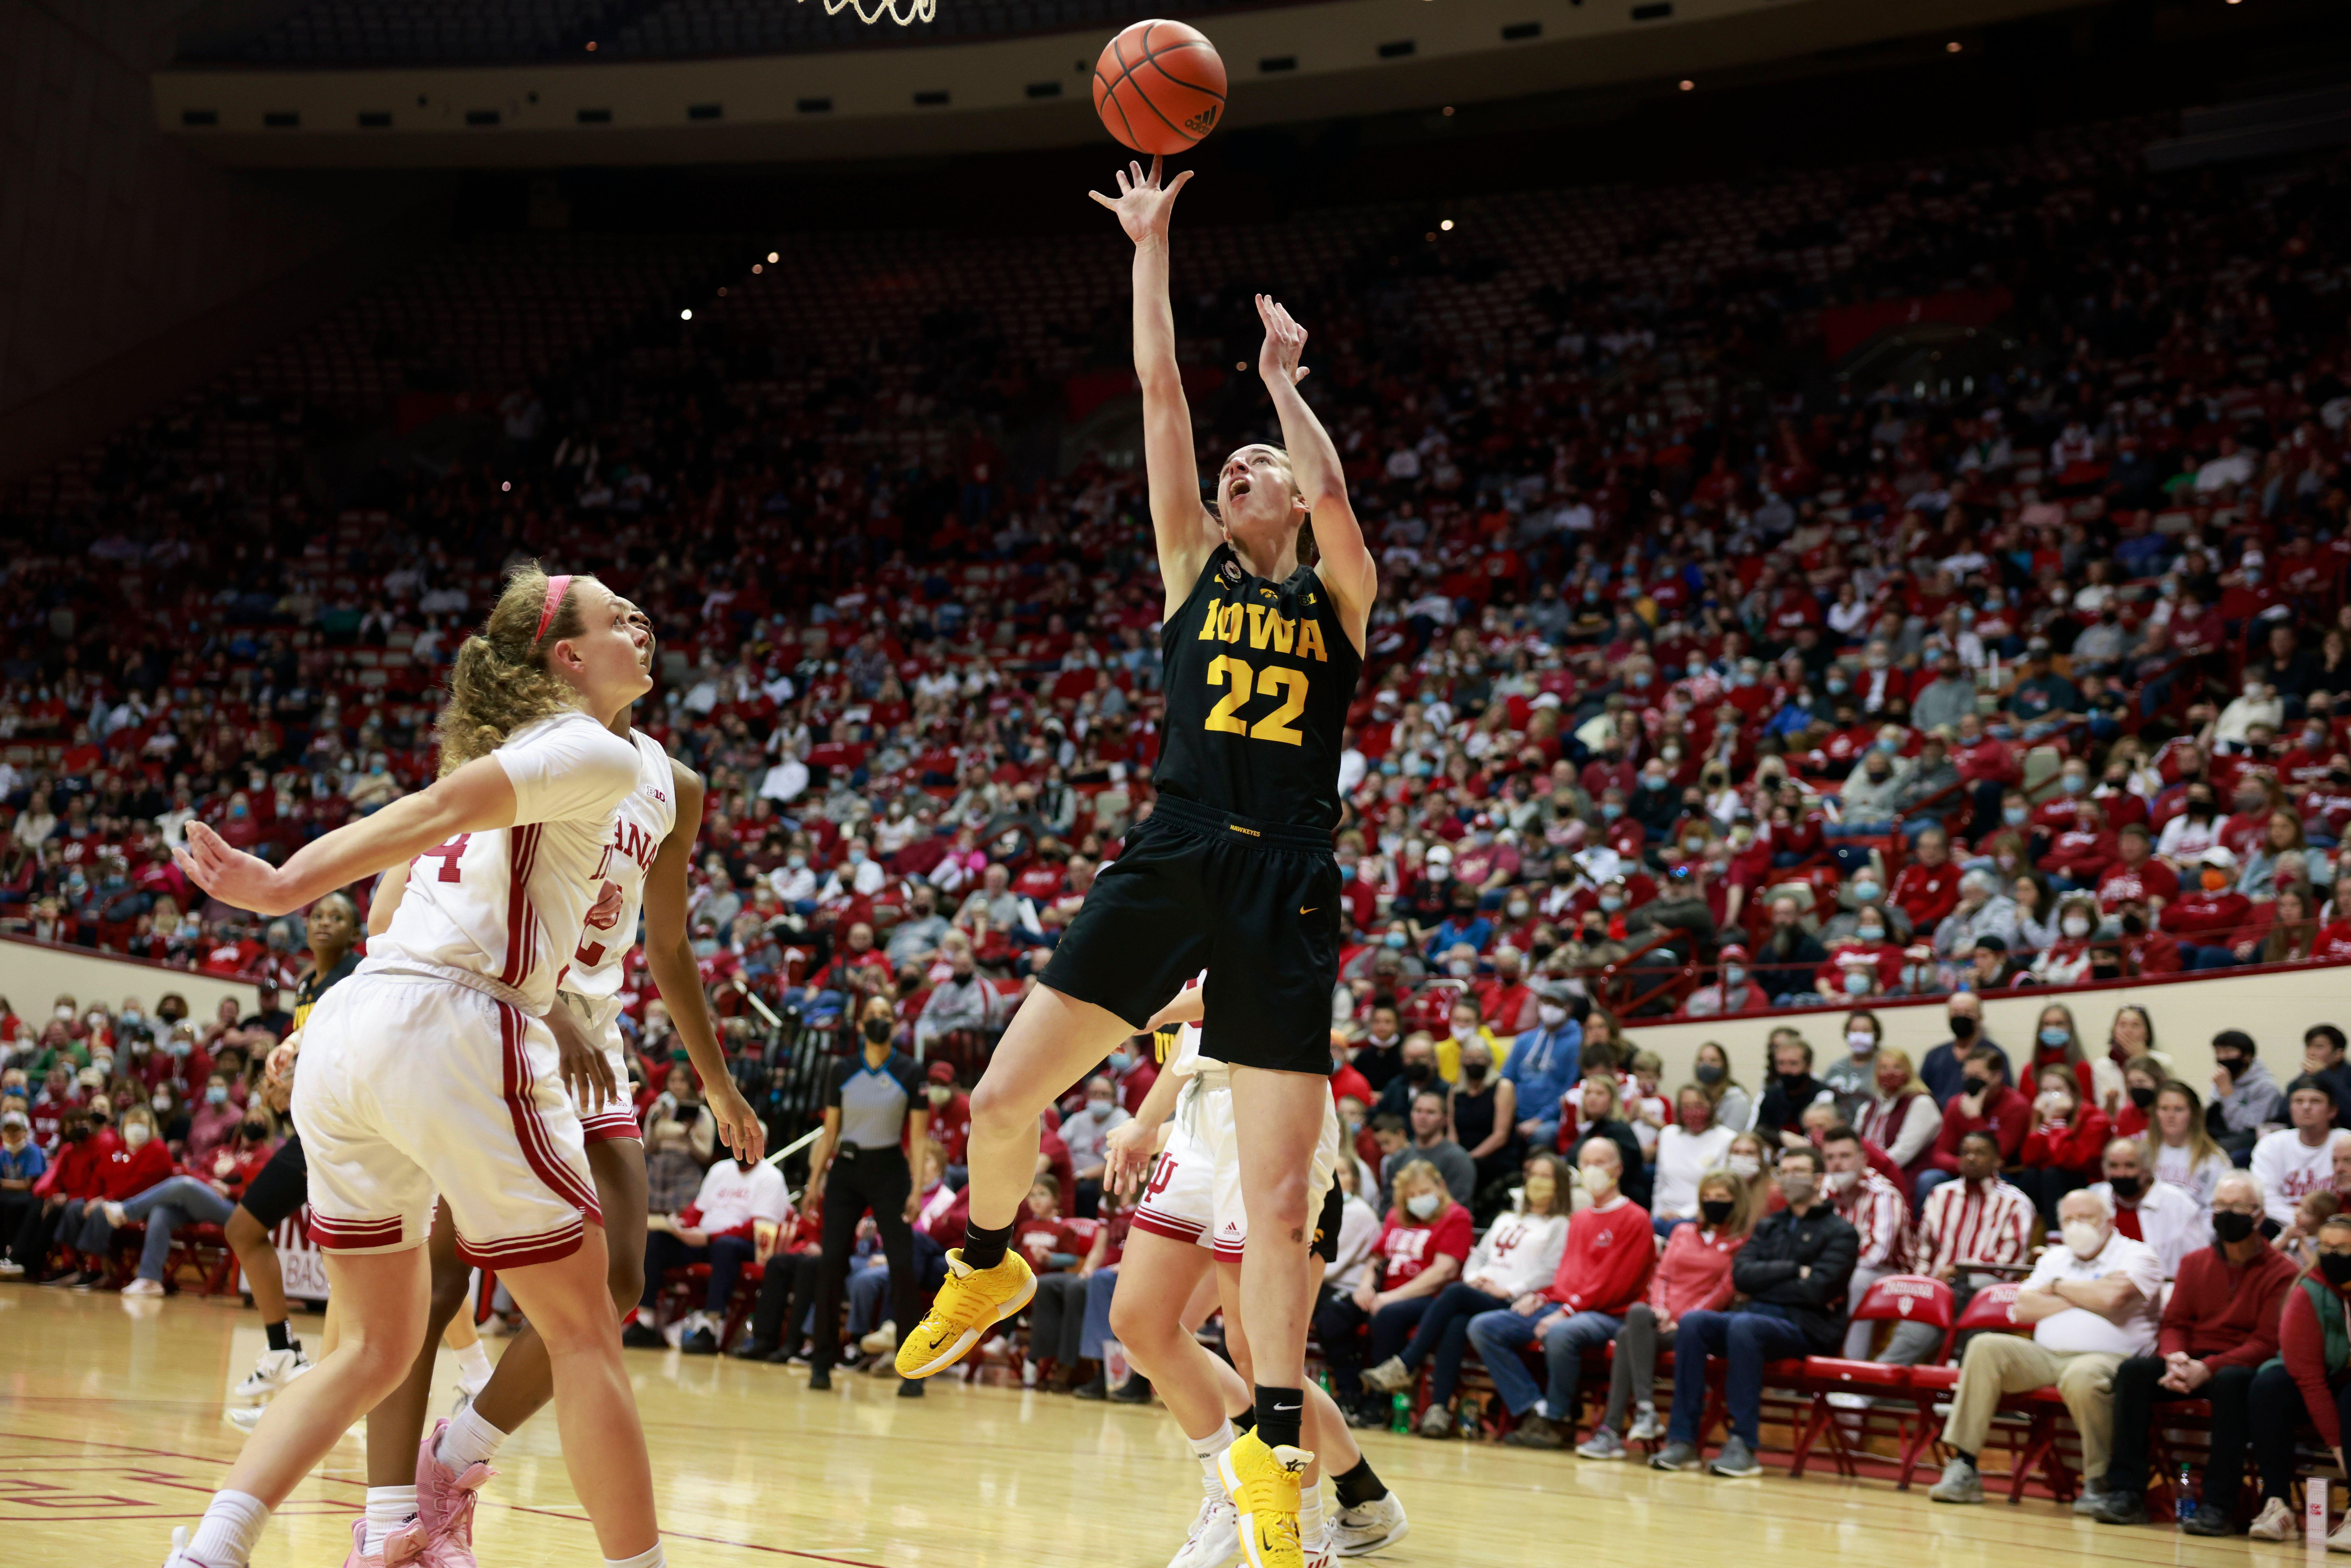 2HPB1BA Bloomington, United States. 19th Feb, 2022. Iowa Hawkeyes guard Caitlin Clark (22) goes to the basket against Indiana University during an NCAA women's basketball game in Bloomington, Ind. The Iowa Hawkeyes beat the Indiana University Hoosiers 96-91. Credit: SOPA Images Limited/Alamy Live News